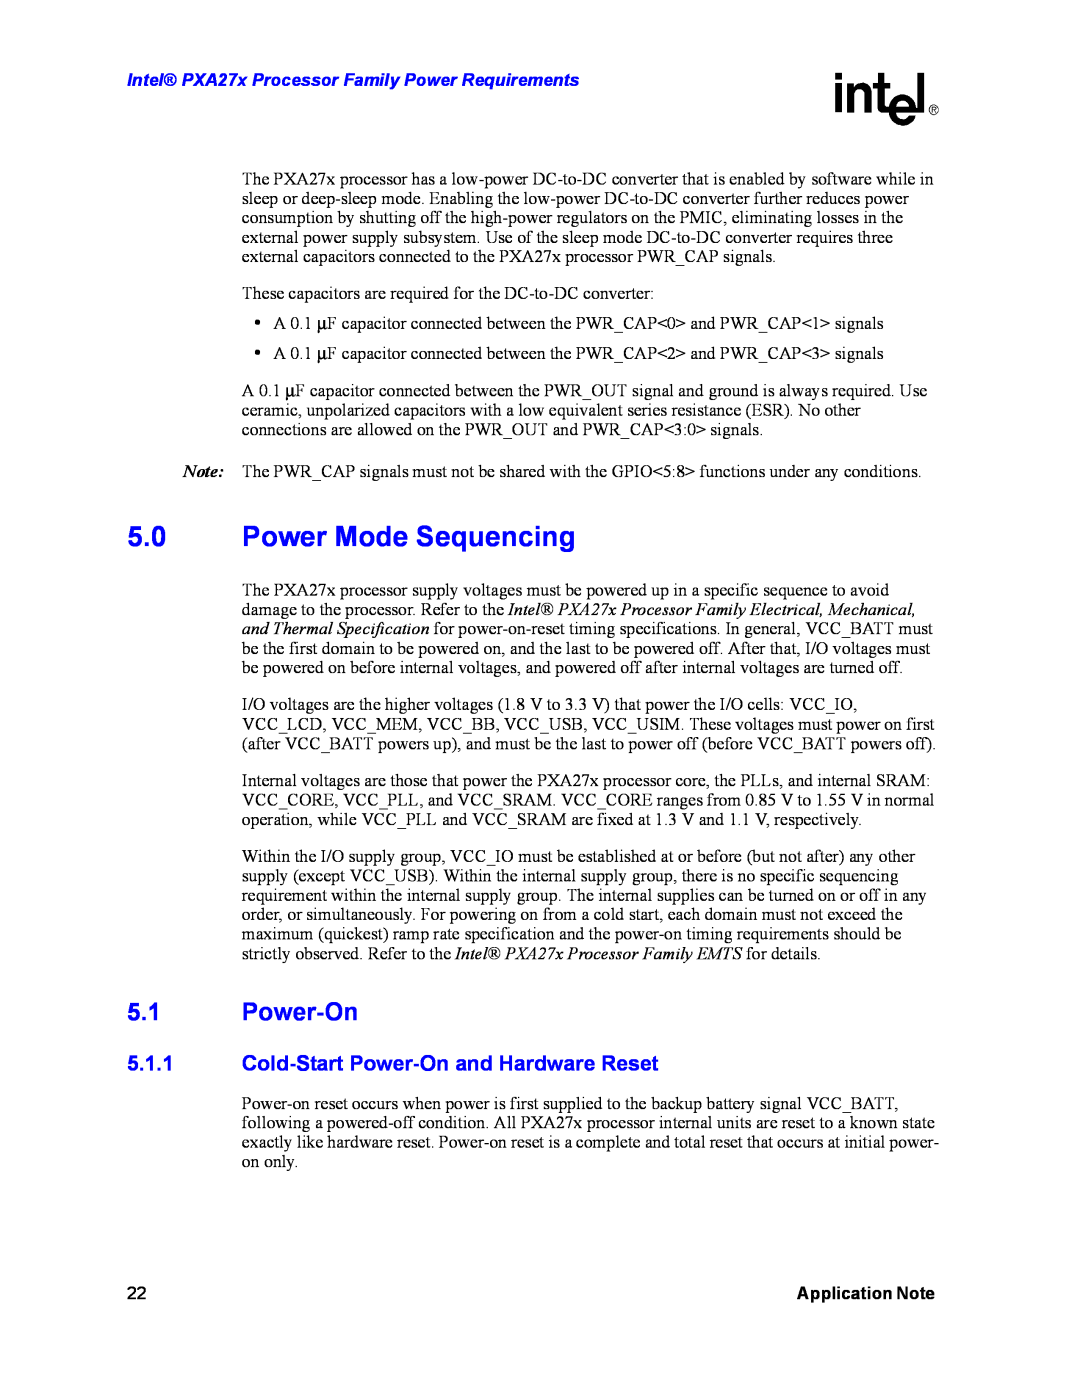 Intel PXA27X manual Power Mode Sequencing, Cold-Start Power-On and Hardware Reset, Application Note 